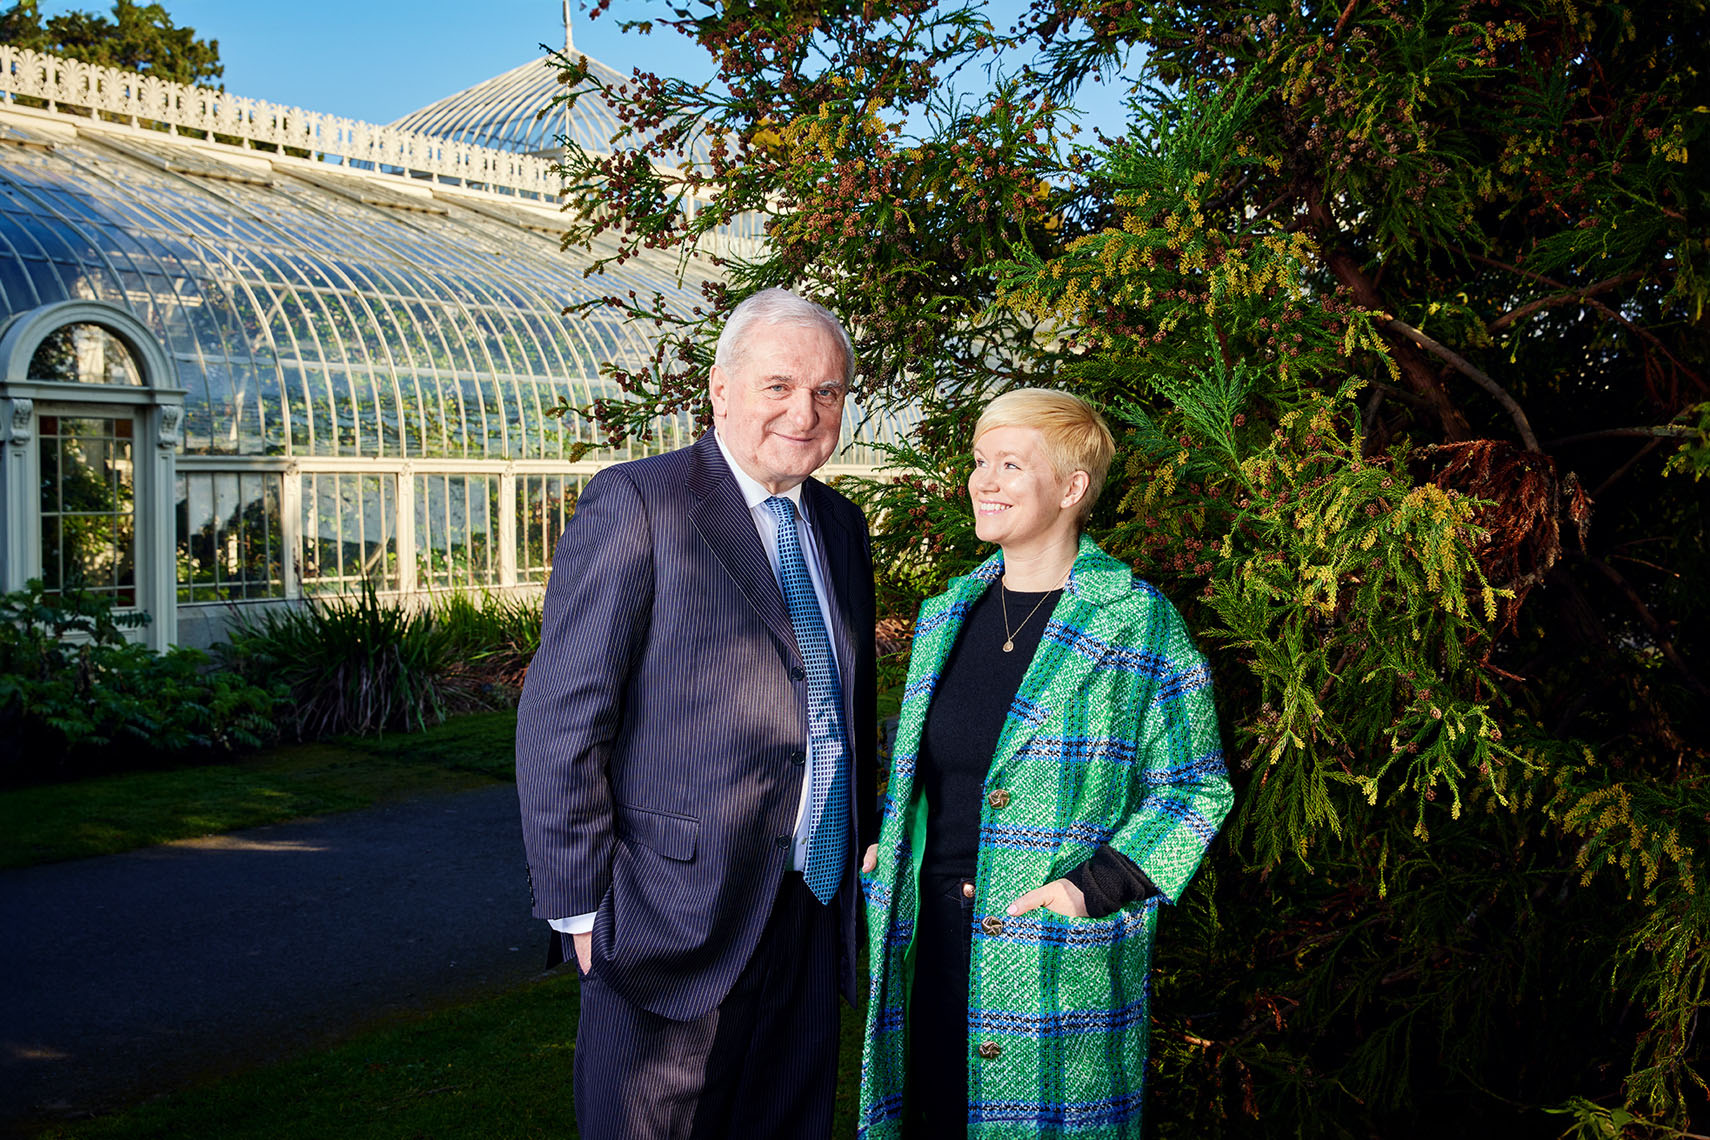 portrait photography: Bertie Ahern and Ccelia Ahern